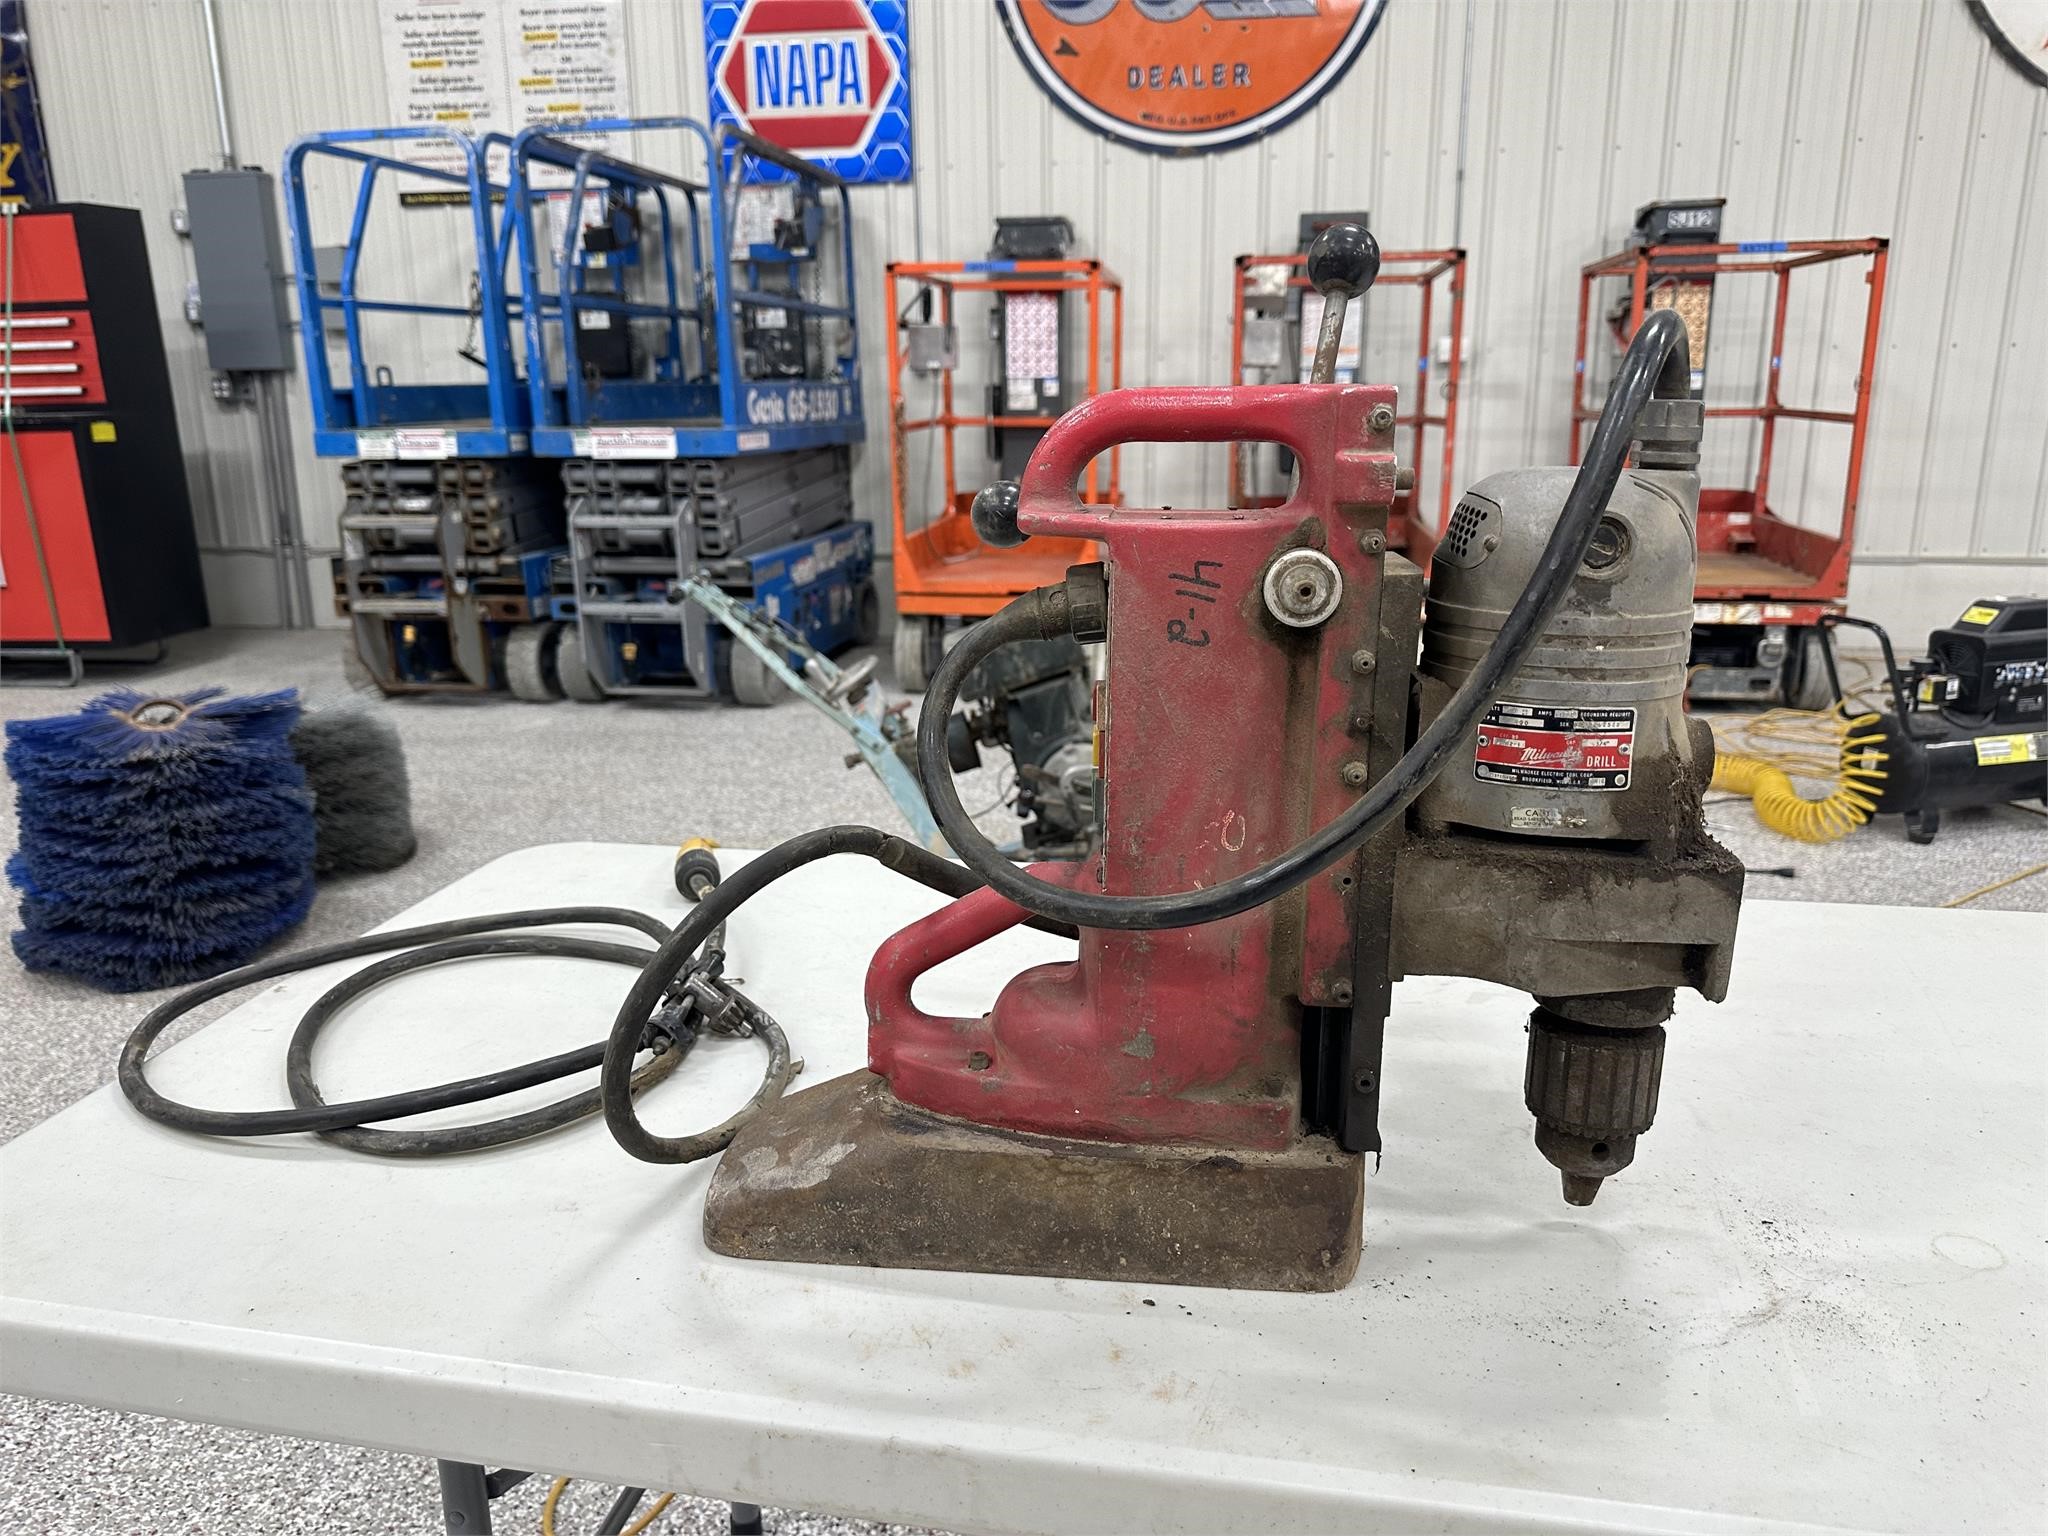 Shop / Warehouse Auction Results